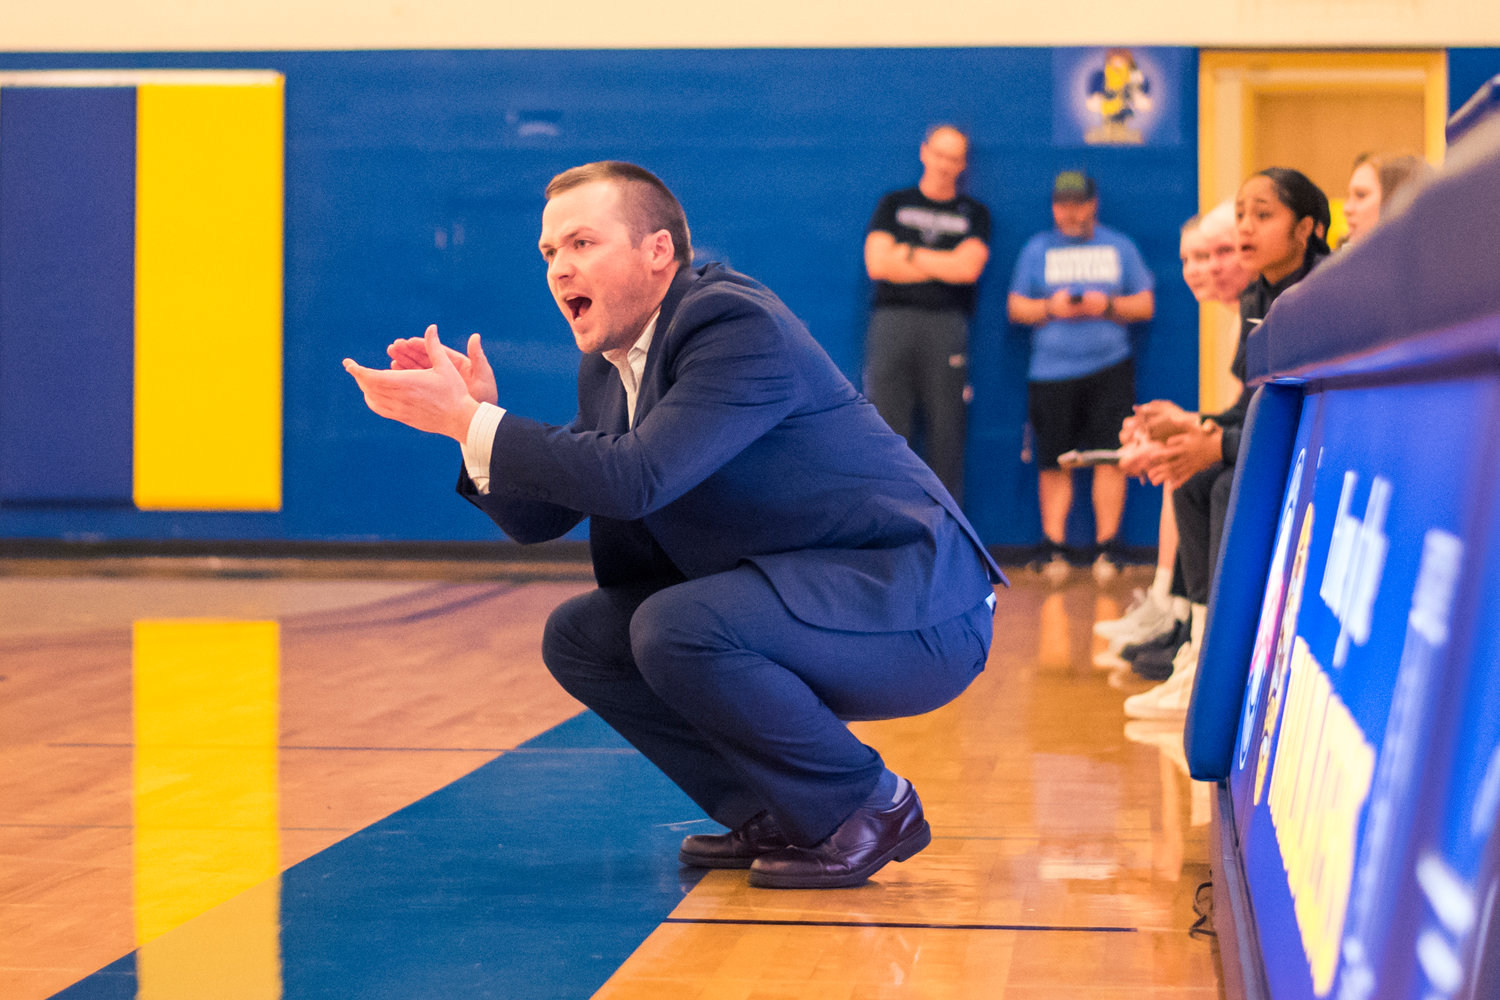 Centralia's coach Caleb Sells yells to players during a women's basketball game against S.P.S.C.C Wednesday night at Centralia College.